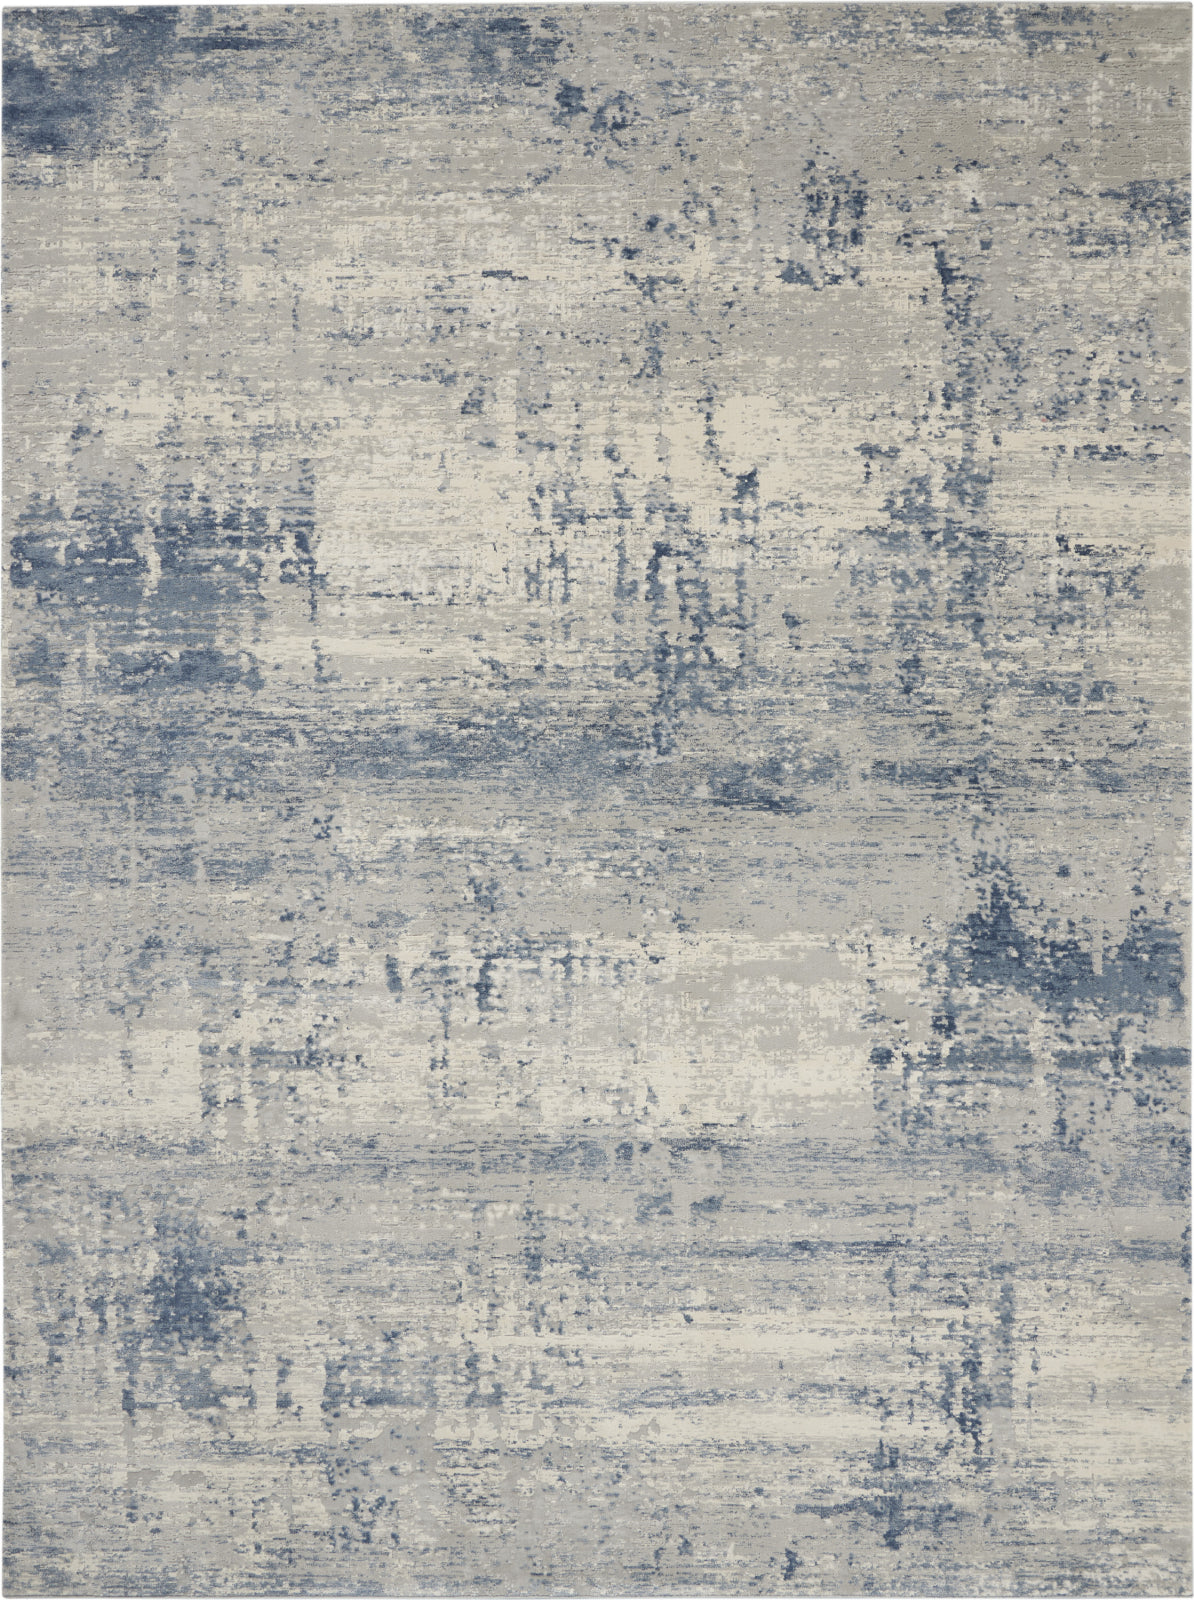 Rustic Textures Incredible by Blue/Ivory Rugs RUS02 Rug Nourison Decor and Area –